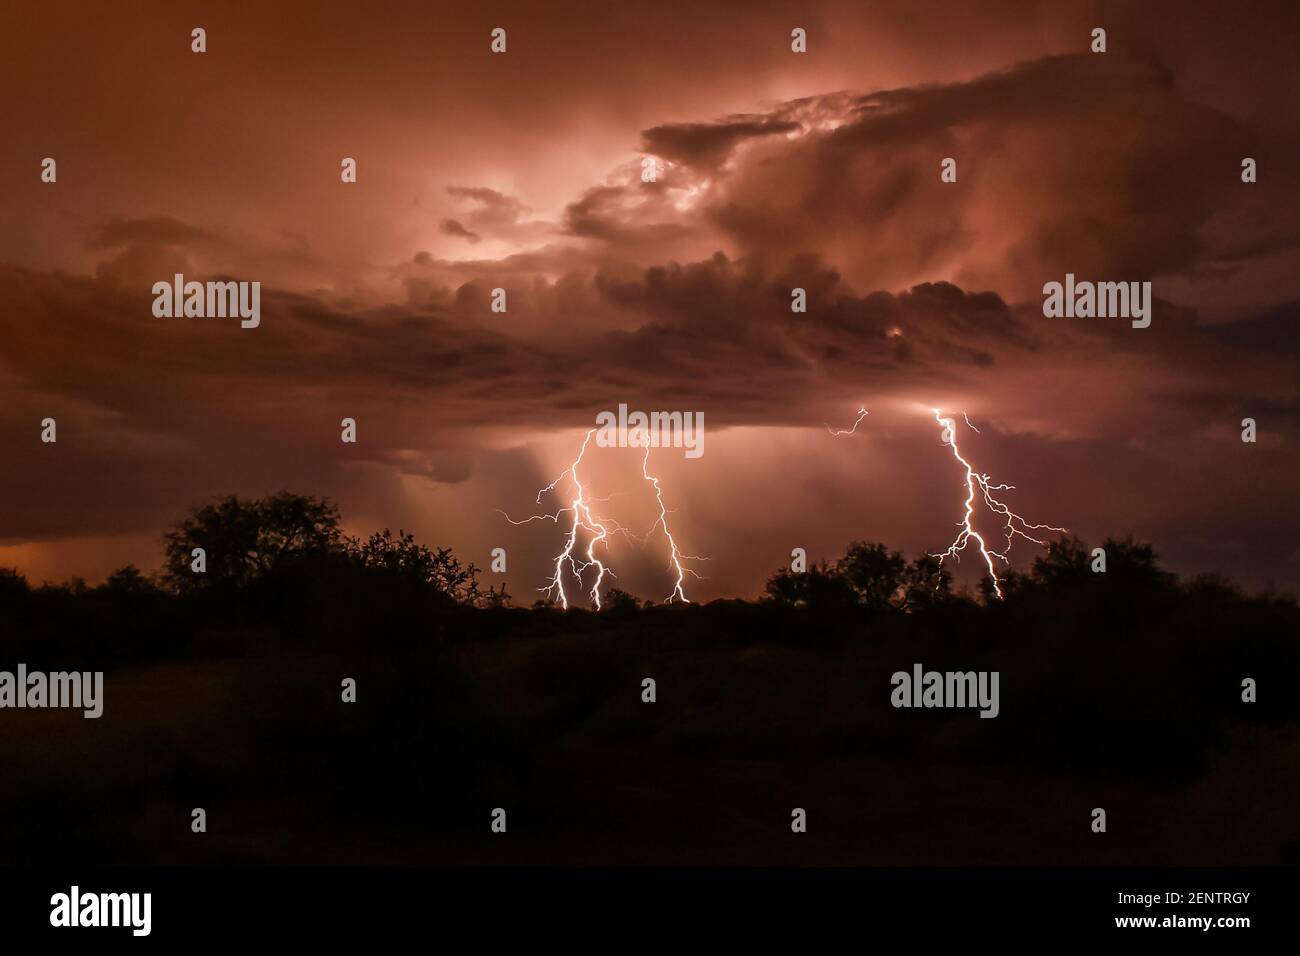 Lightning strike during summer thunderstorm, in Arizona's Sonoran Desert. Three bolts extend down from the clouds, which are backlit by the discharge. Stock Photo